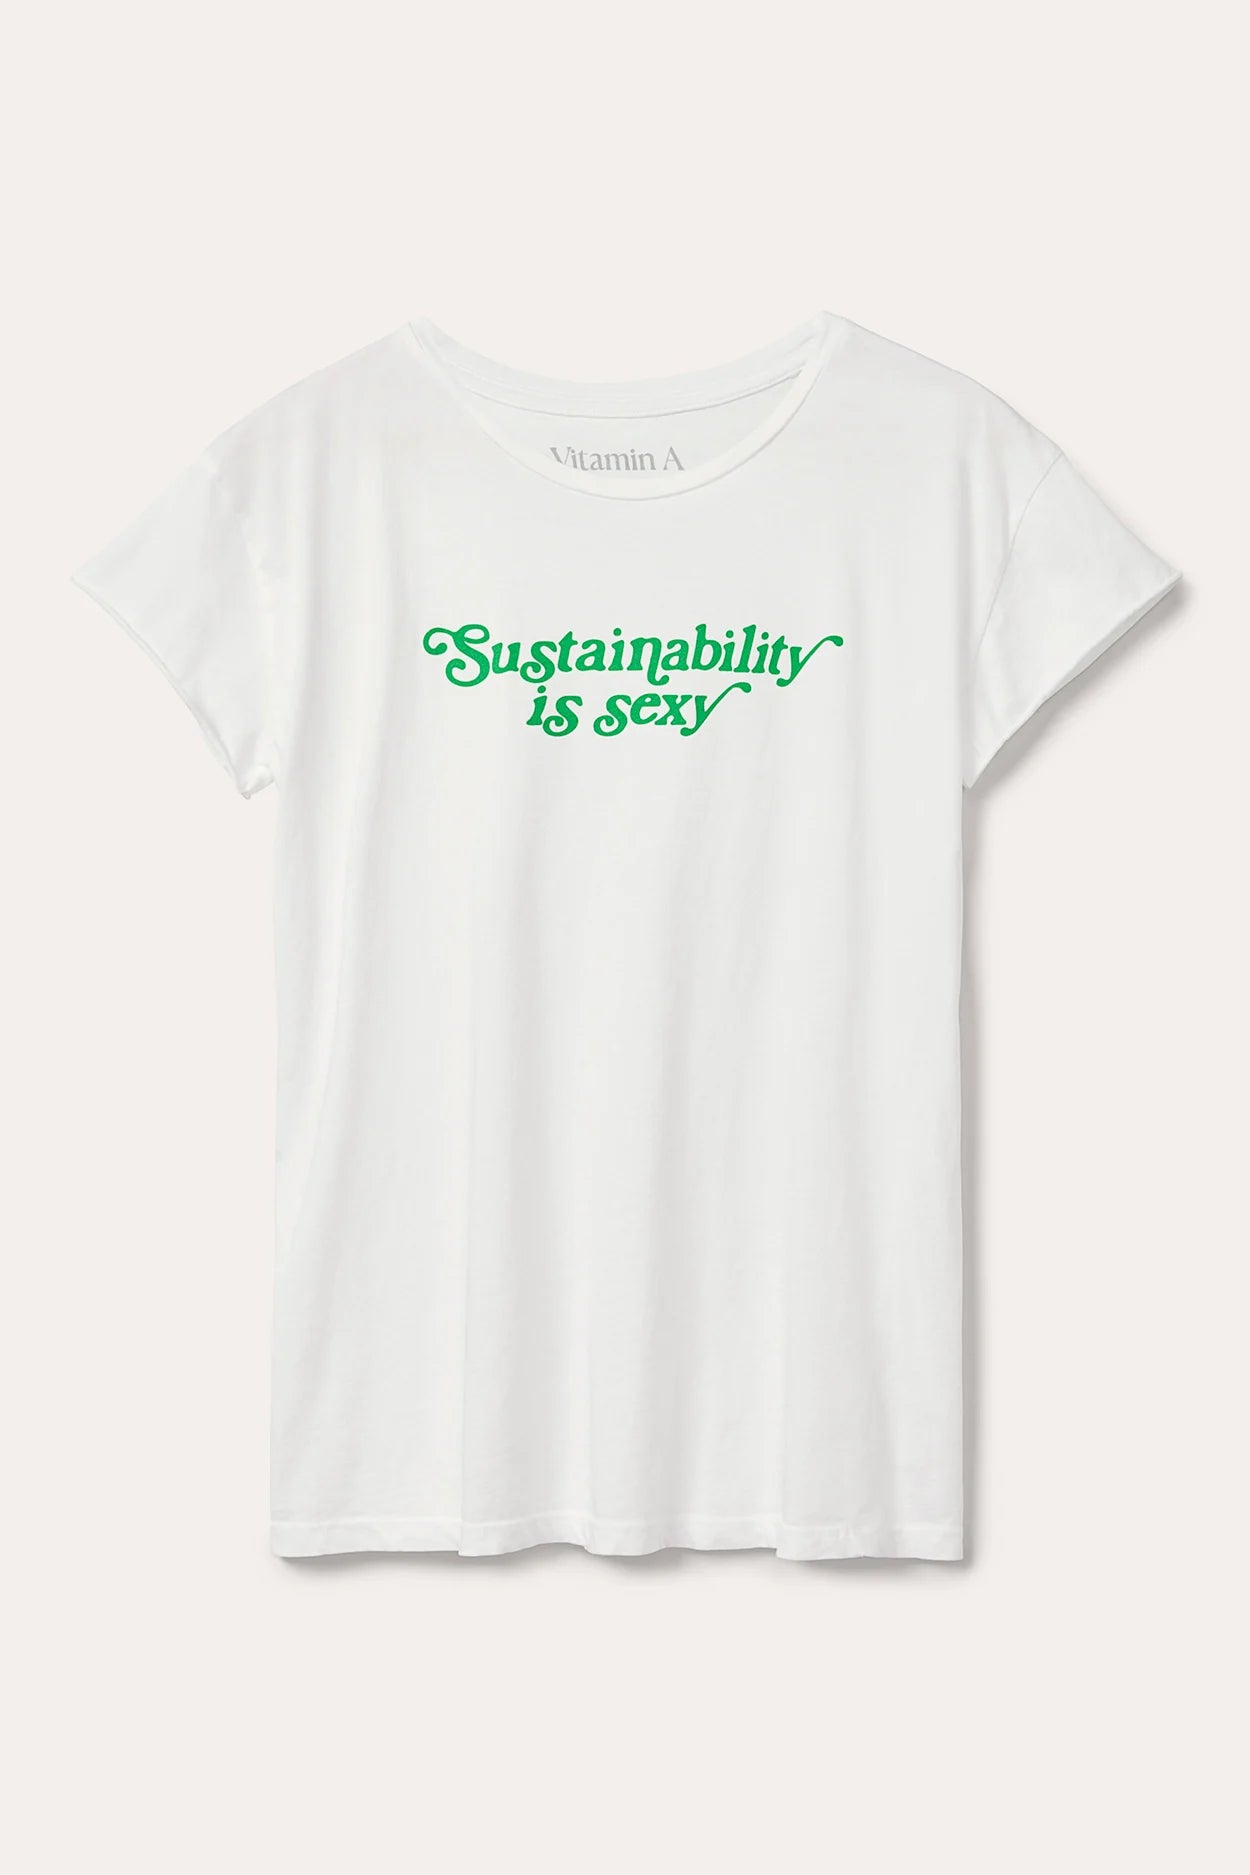 Vitamin A Sustainability is Sexy Organic Graphic Tee